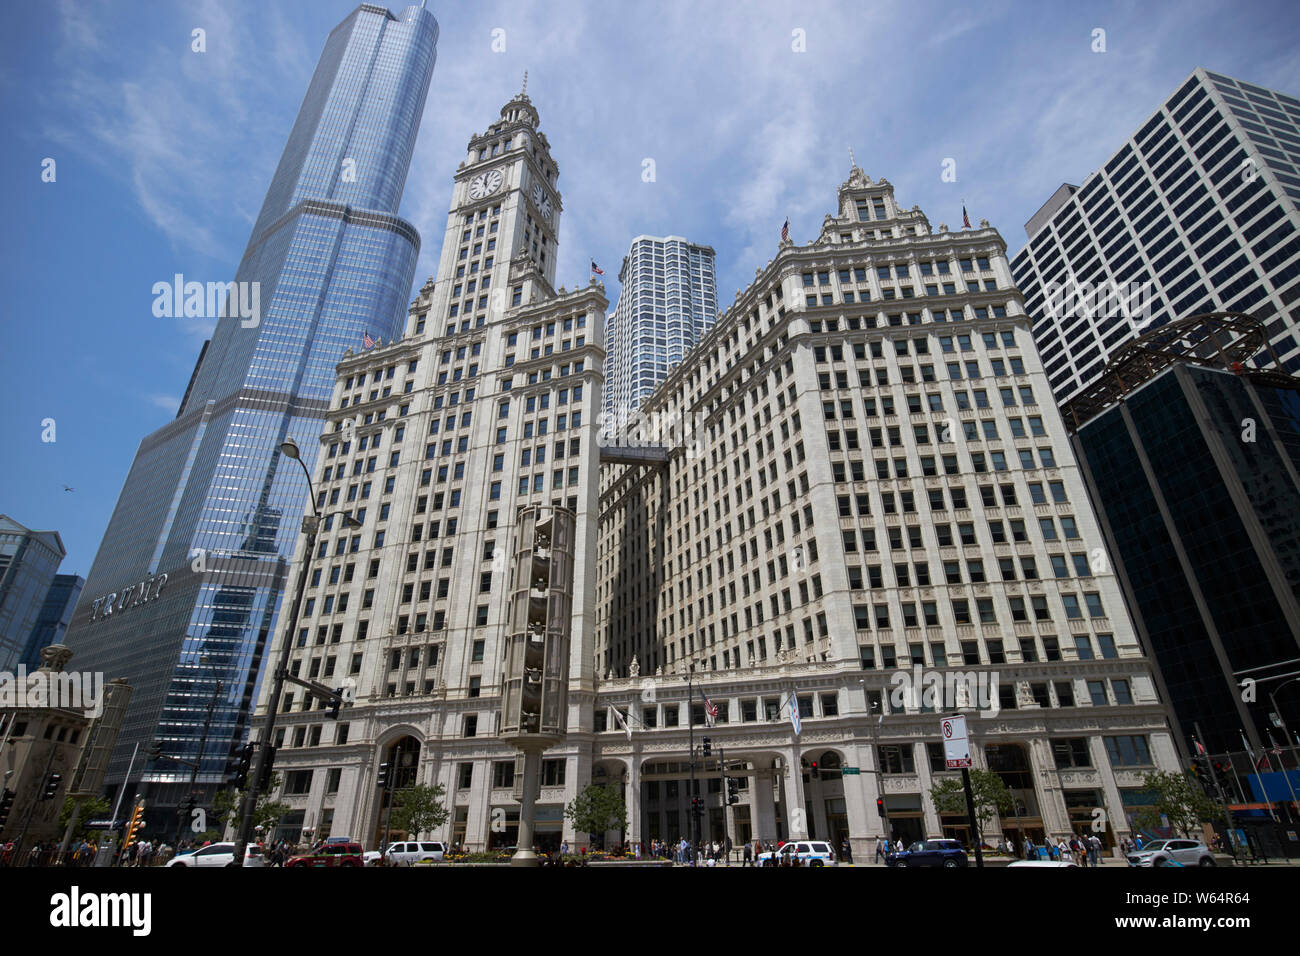 The Wrigley Building and north addition on michigan avenue Chicago IL USA Stock Photo